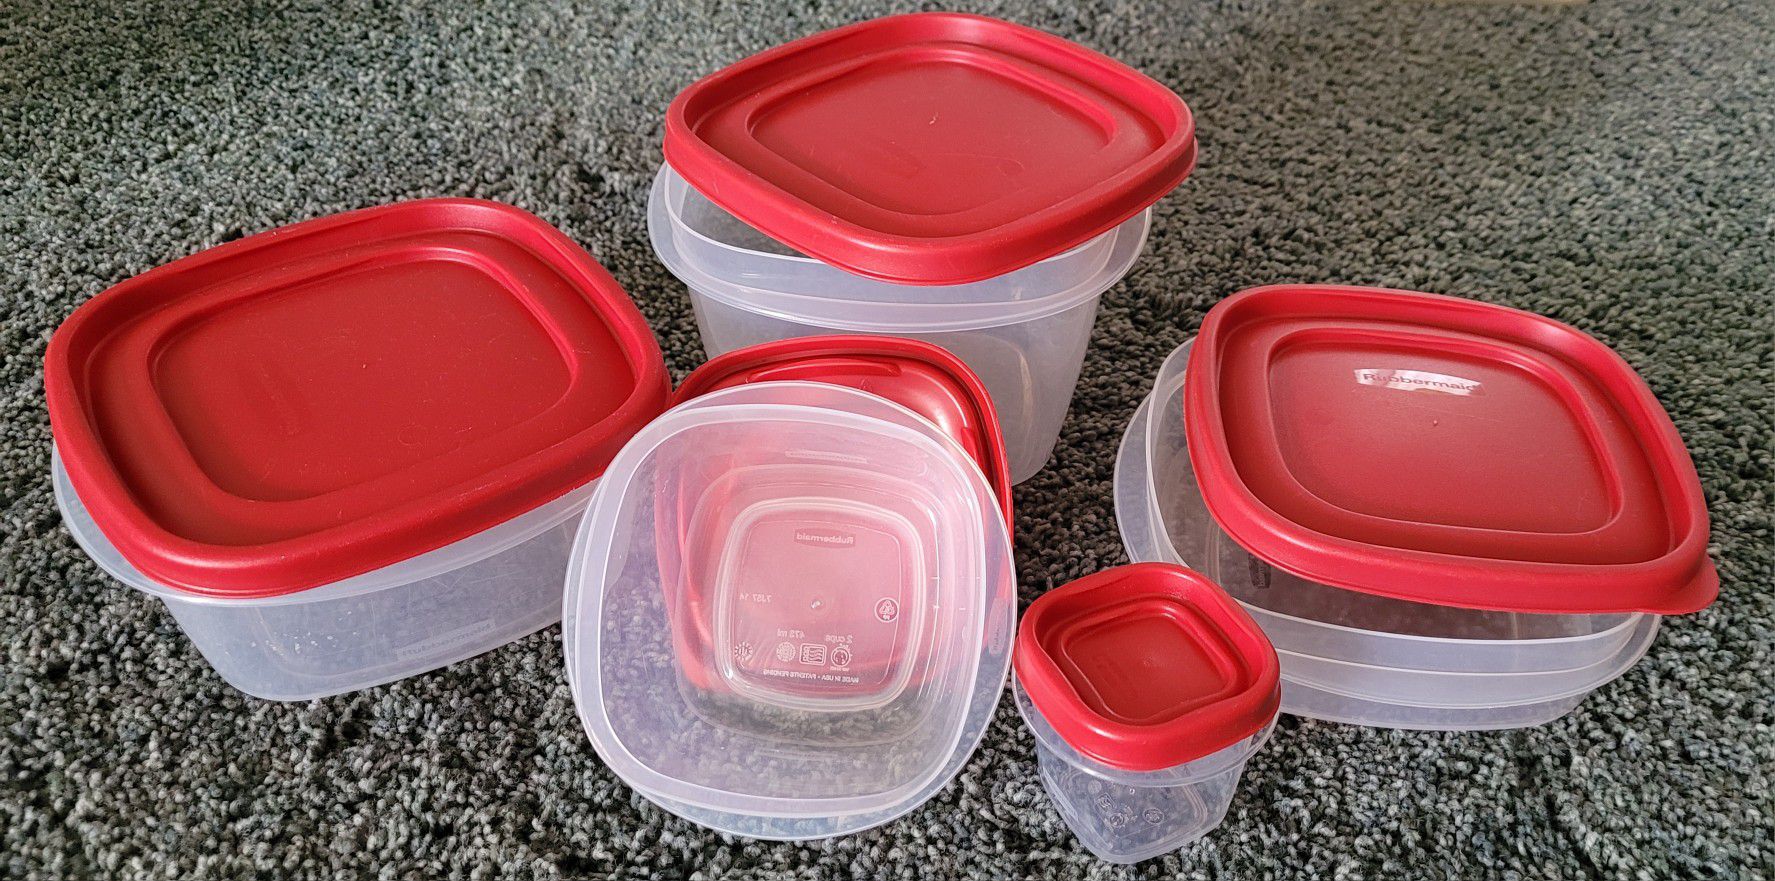 Rubbermaid Storage Containers